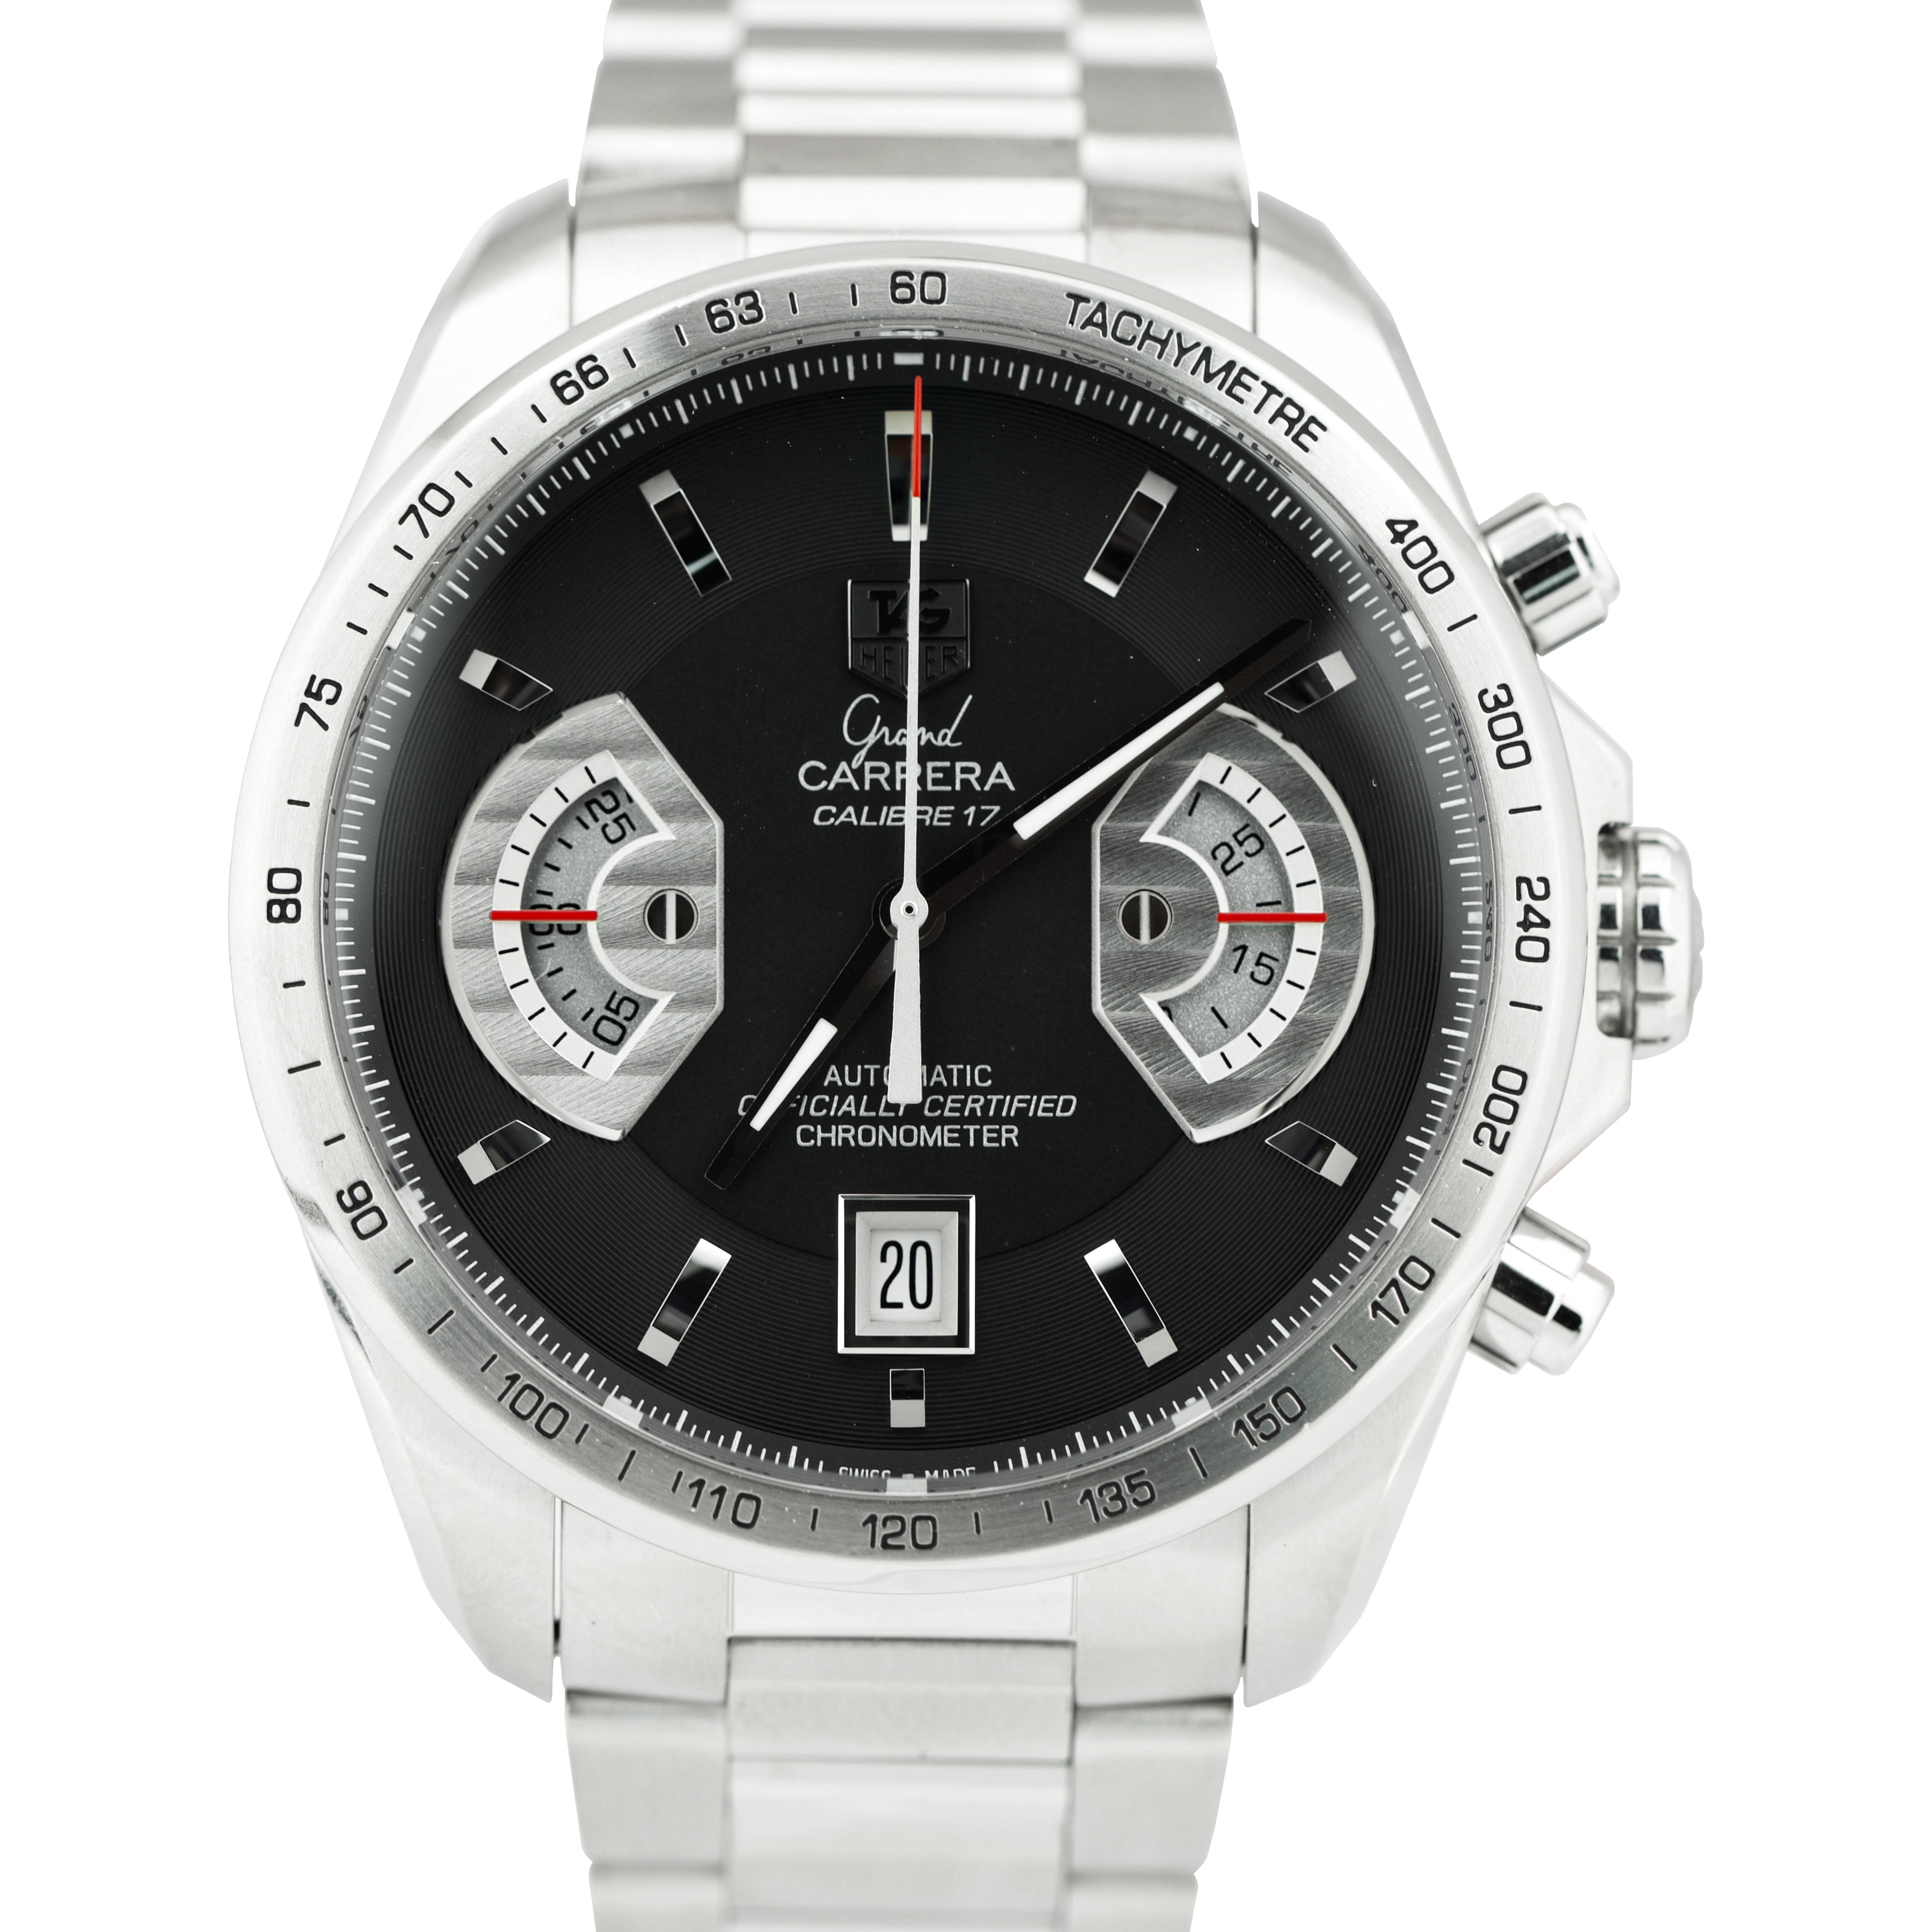 Pre-Owned TAG Heuer Grand Carrera (CAV511A) EST0101218 - Radcliffe